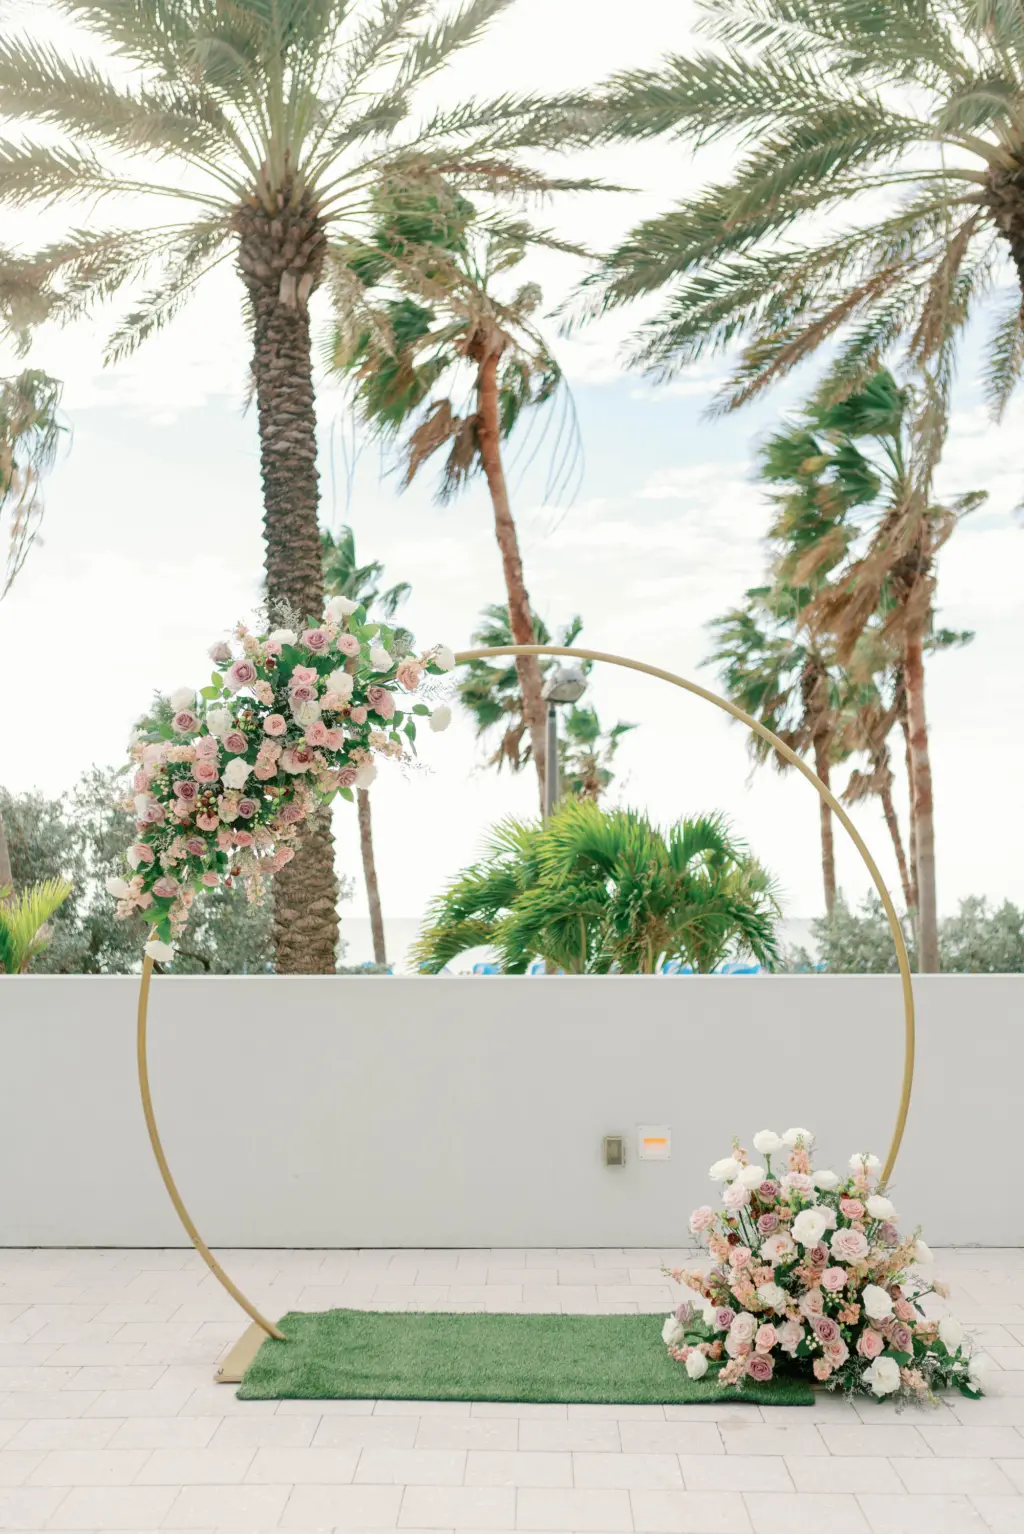 Gold Circle Wedding Arch with Mauve, Blush, and Cream Spring Wedding Floral Accents Ceremony Inspiration